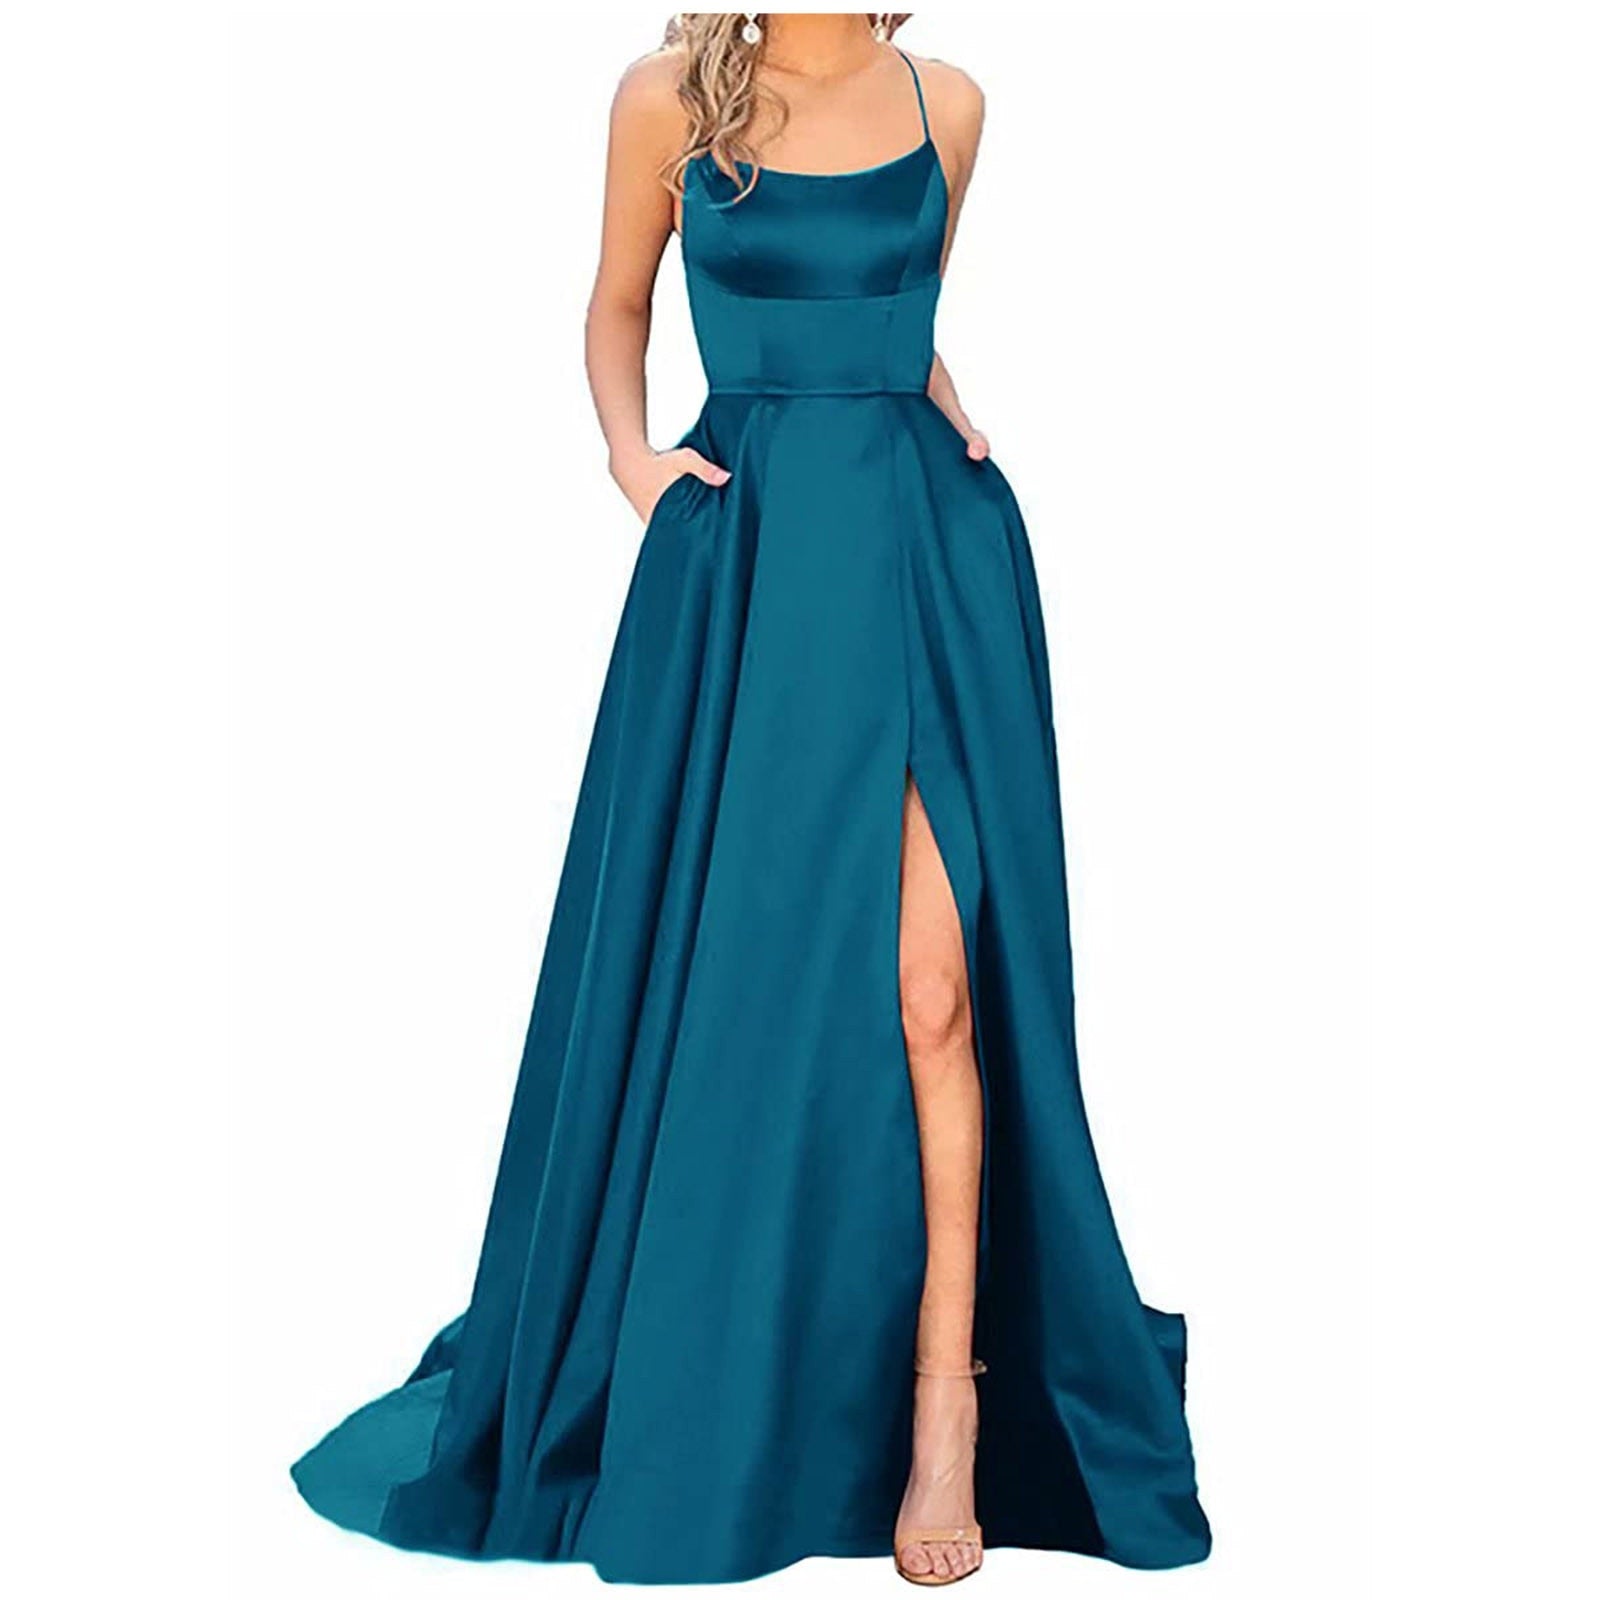 Long Dress with spaghetti straps in silky satin